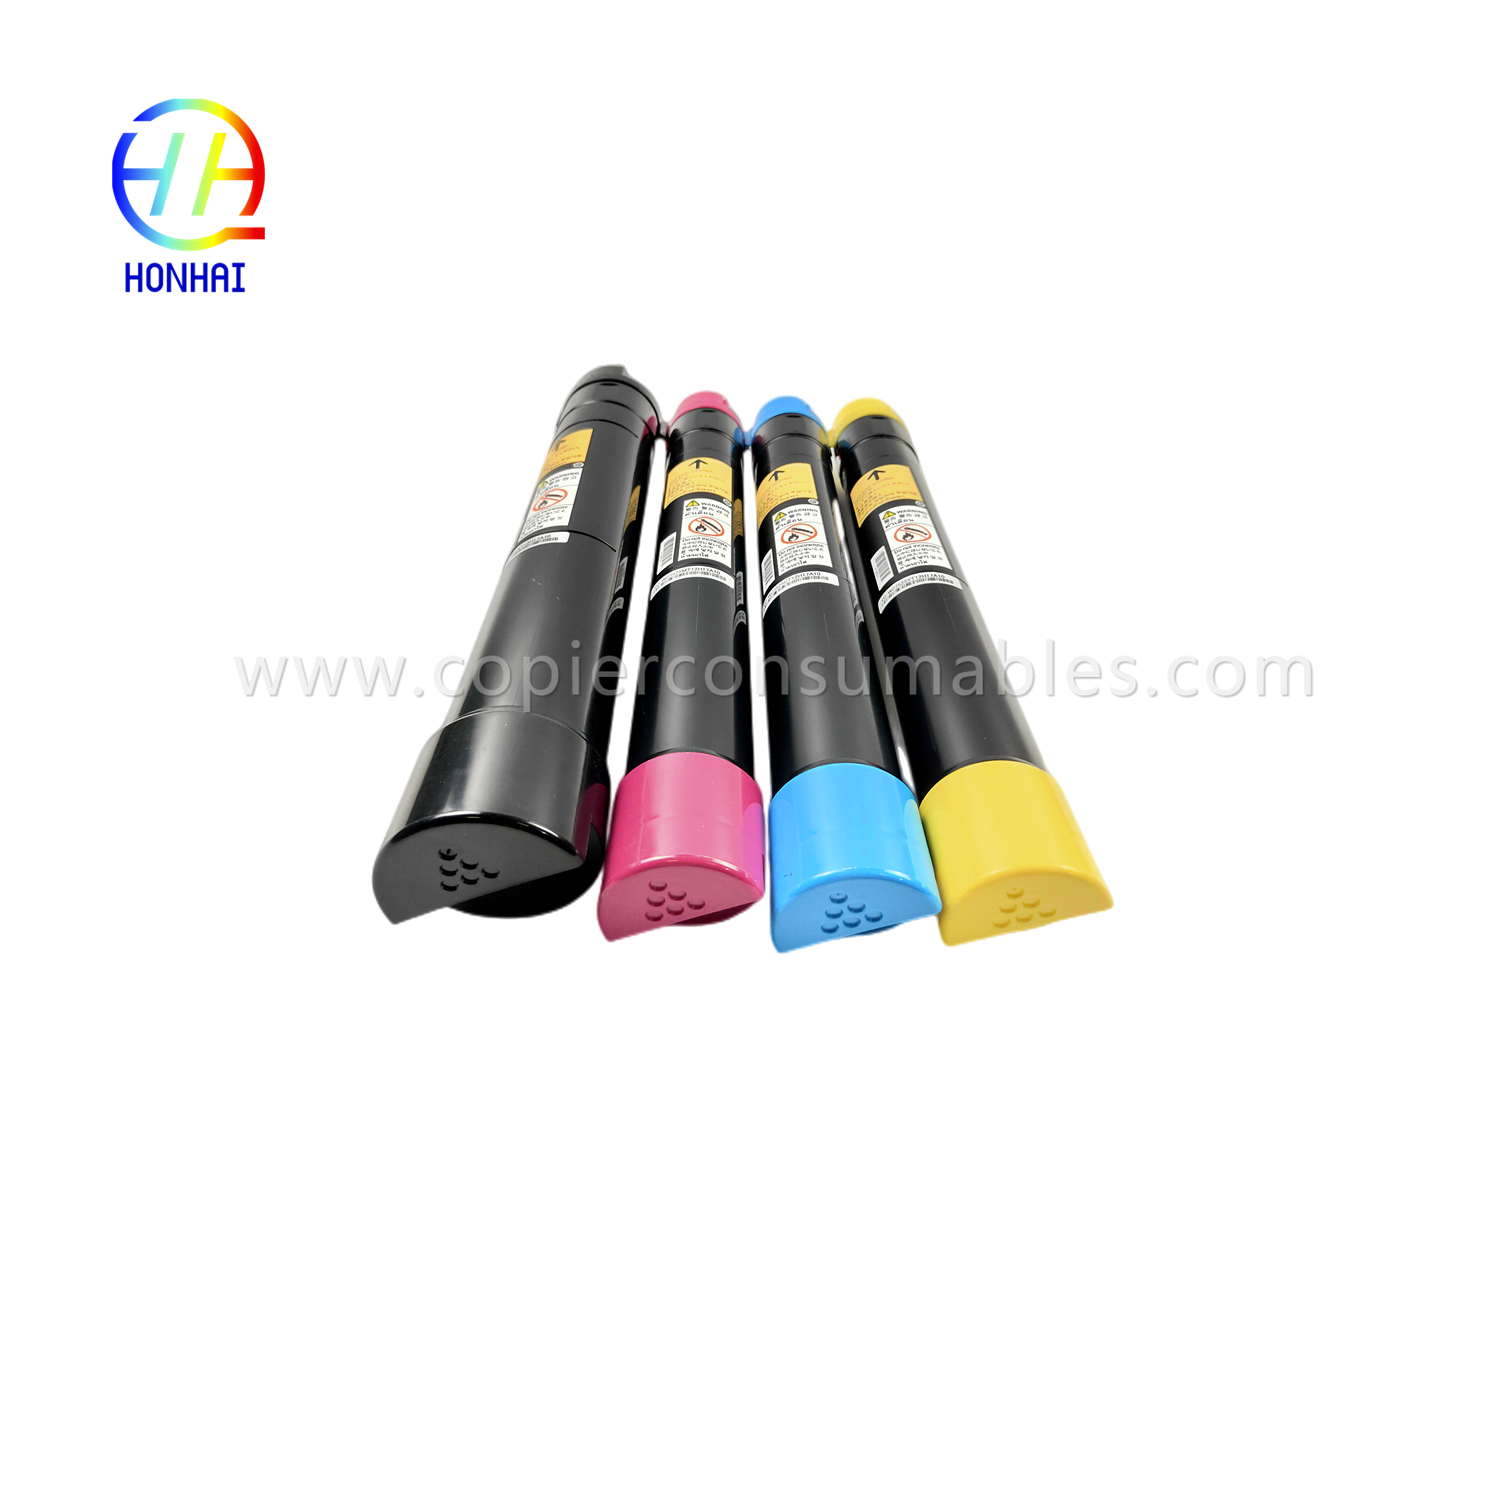 https://www.copierconsumables.com/toner-cartridge-imported-powder-set-bcmy-for-xerox-workcentre-7830-7835-7845-7855-7970-7525-7530-7535-7545-7556-5136-0 006r01514-006r01515-006r01516-produkt/